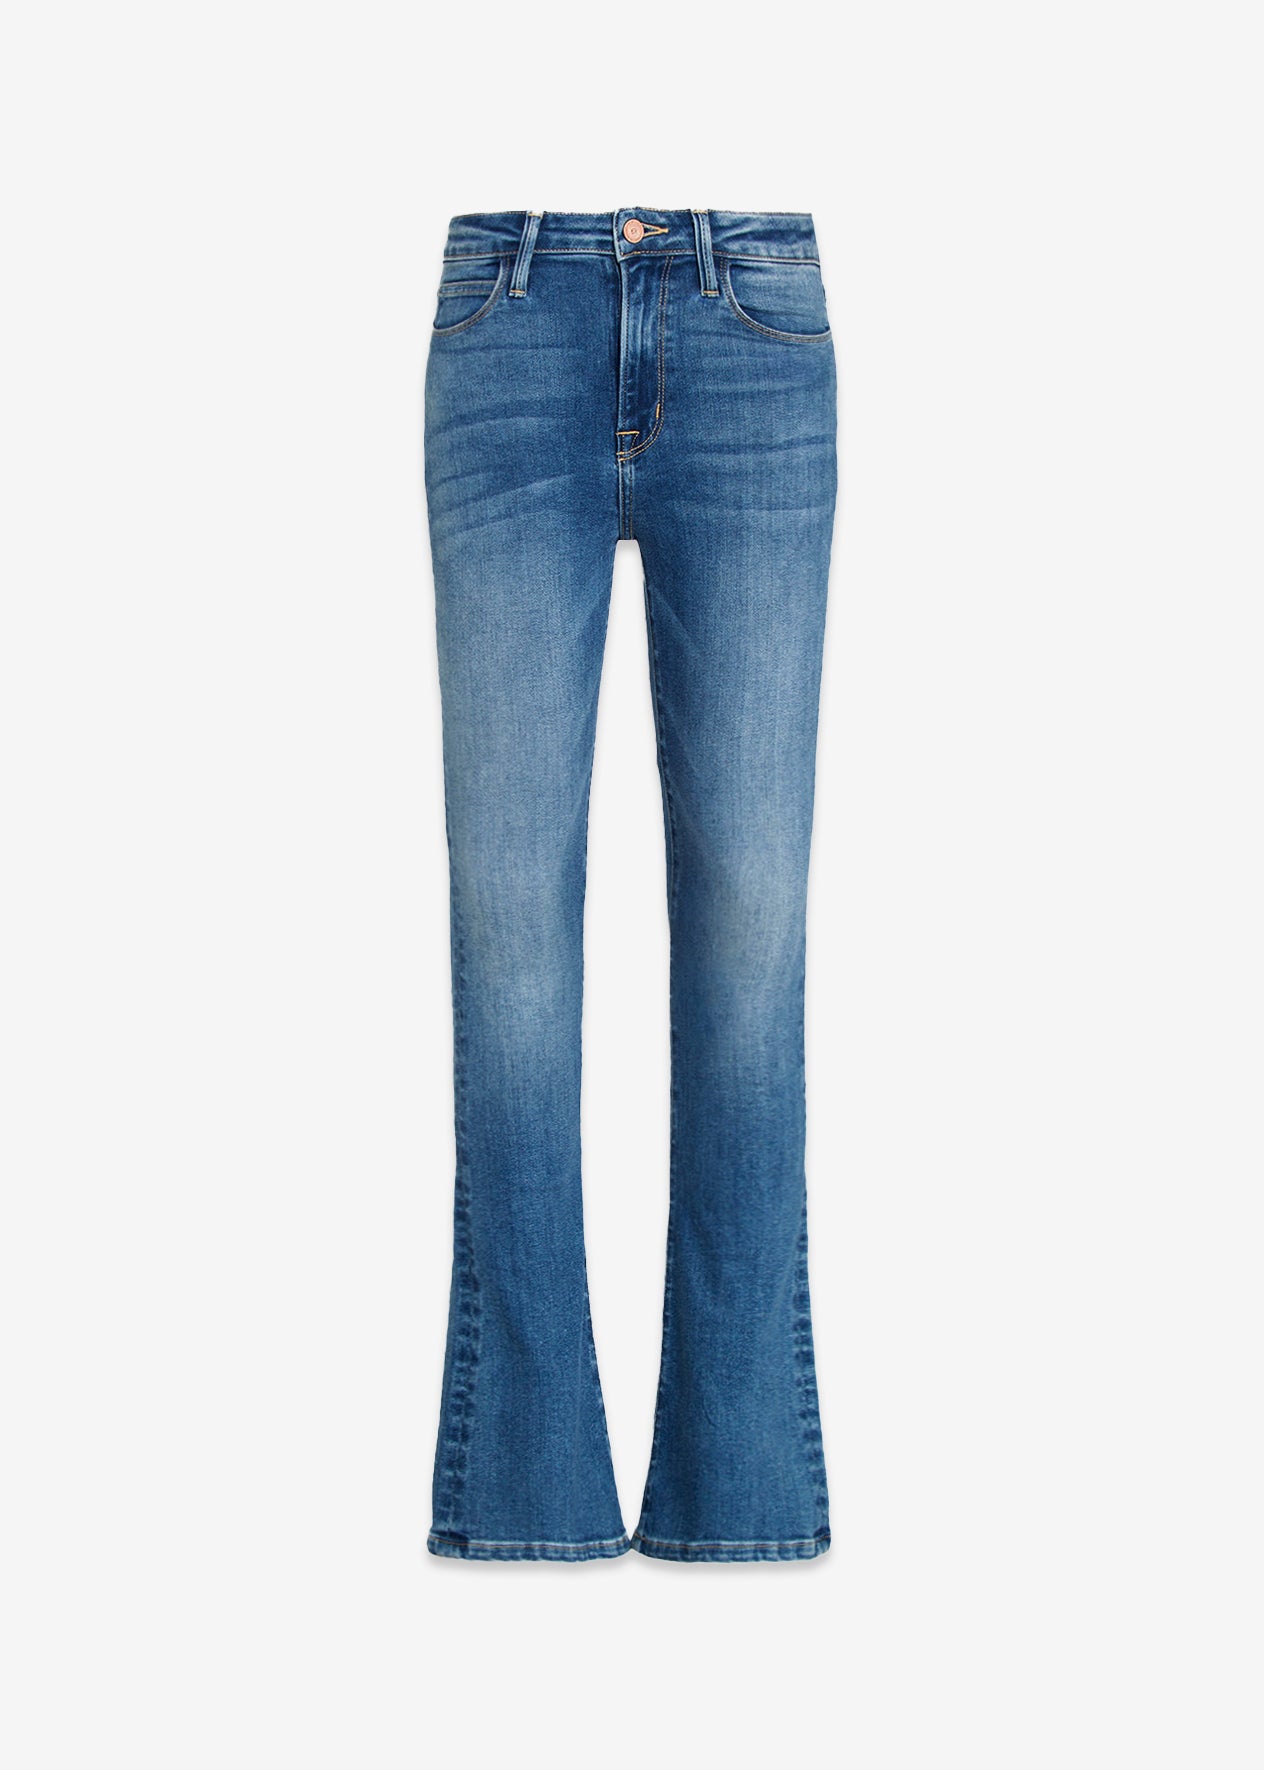 Cora Mid Rise Skinny Boot Jeans